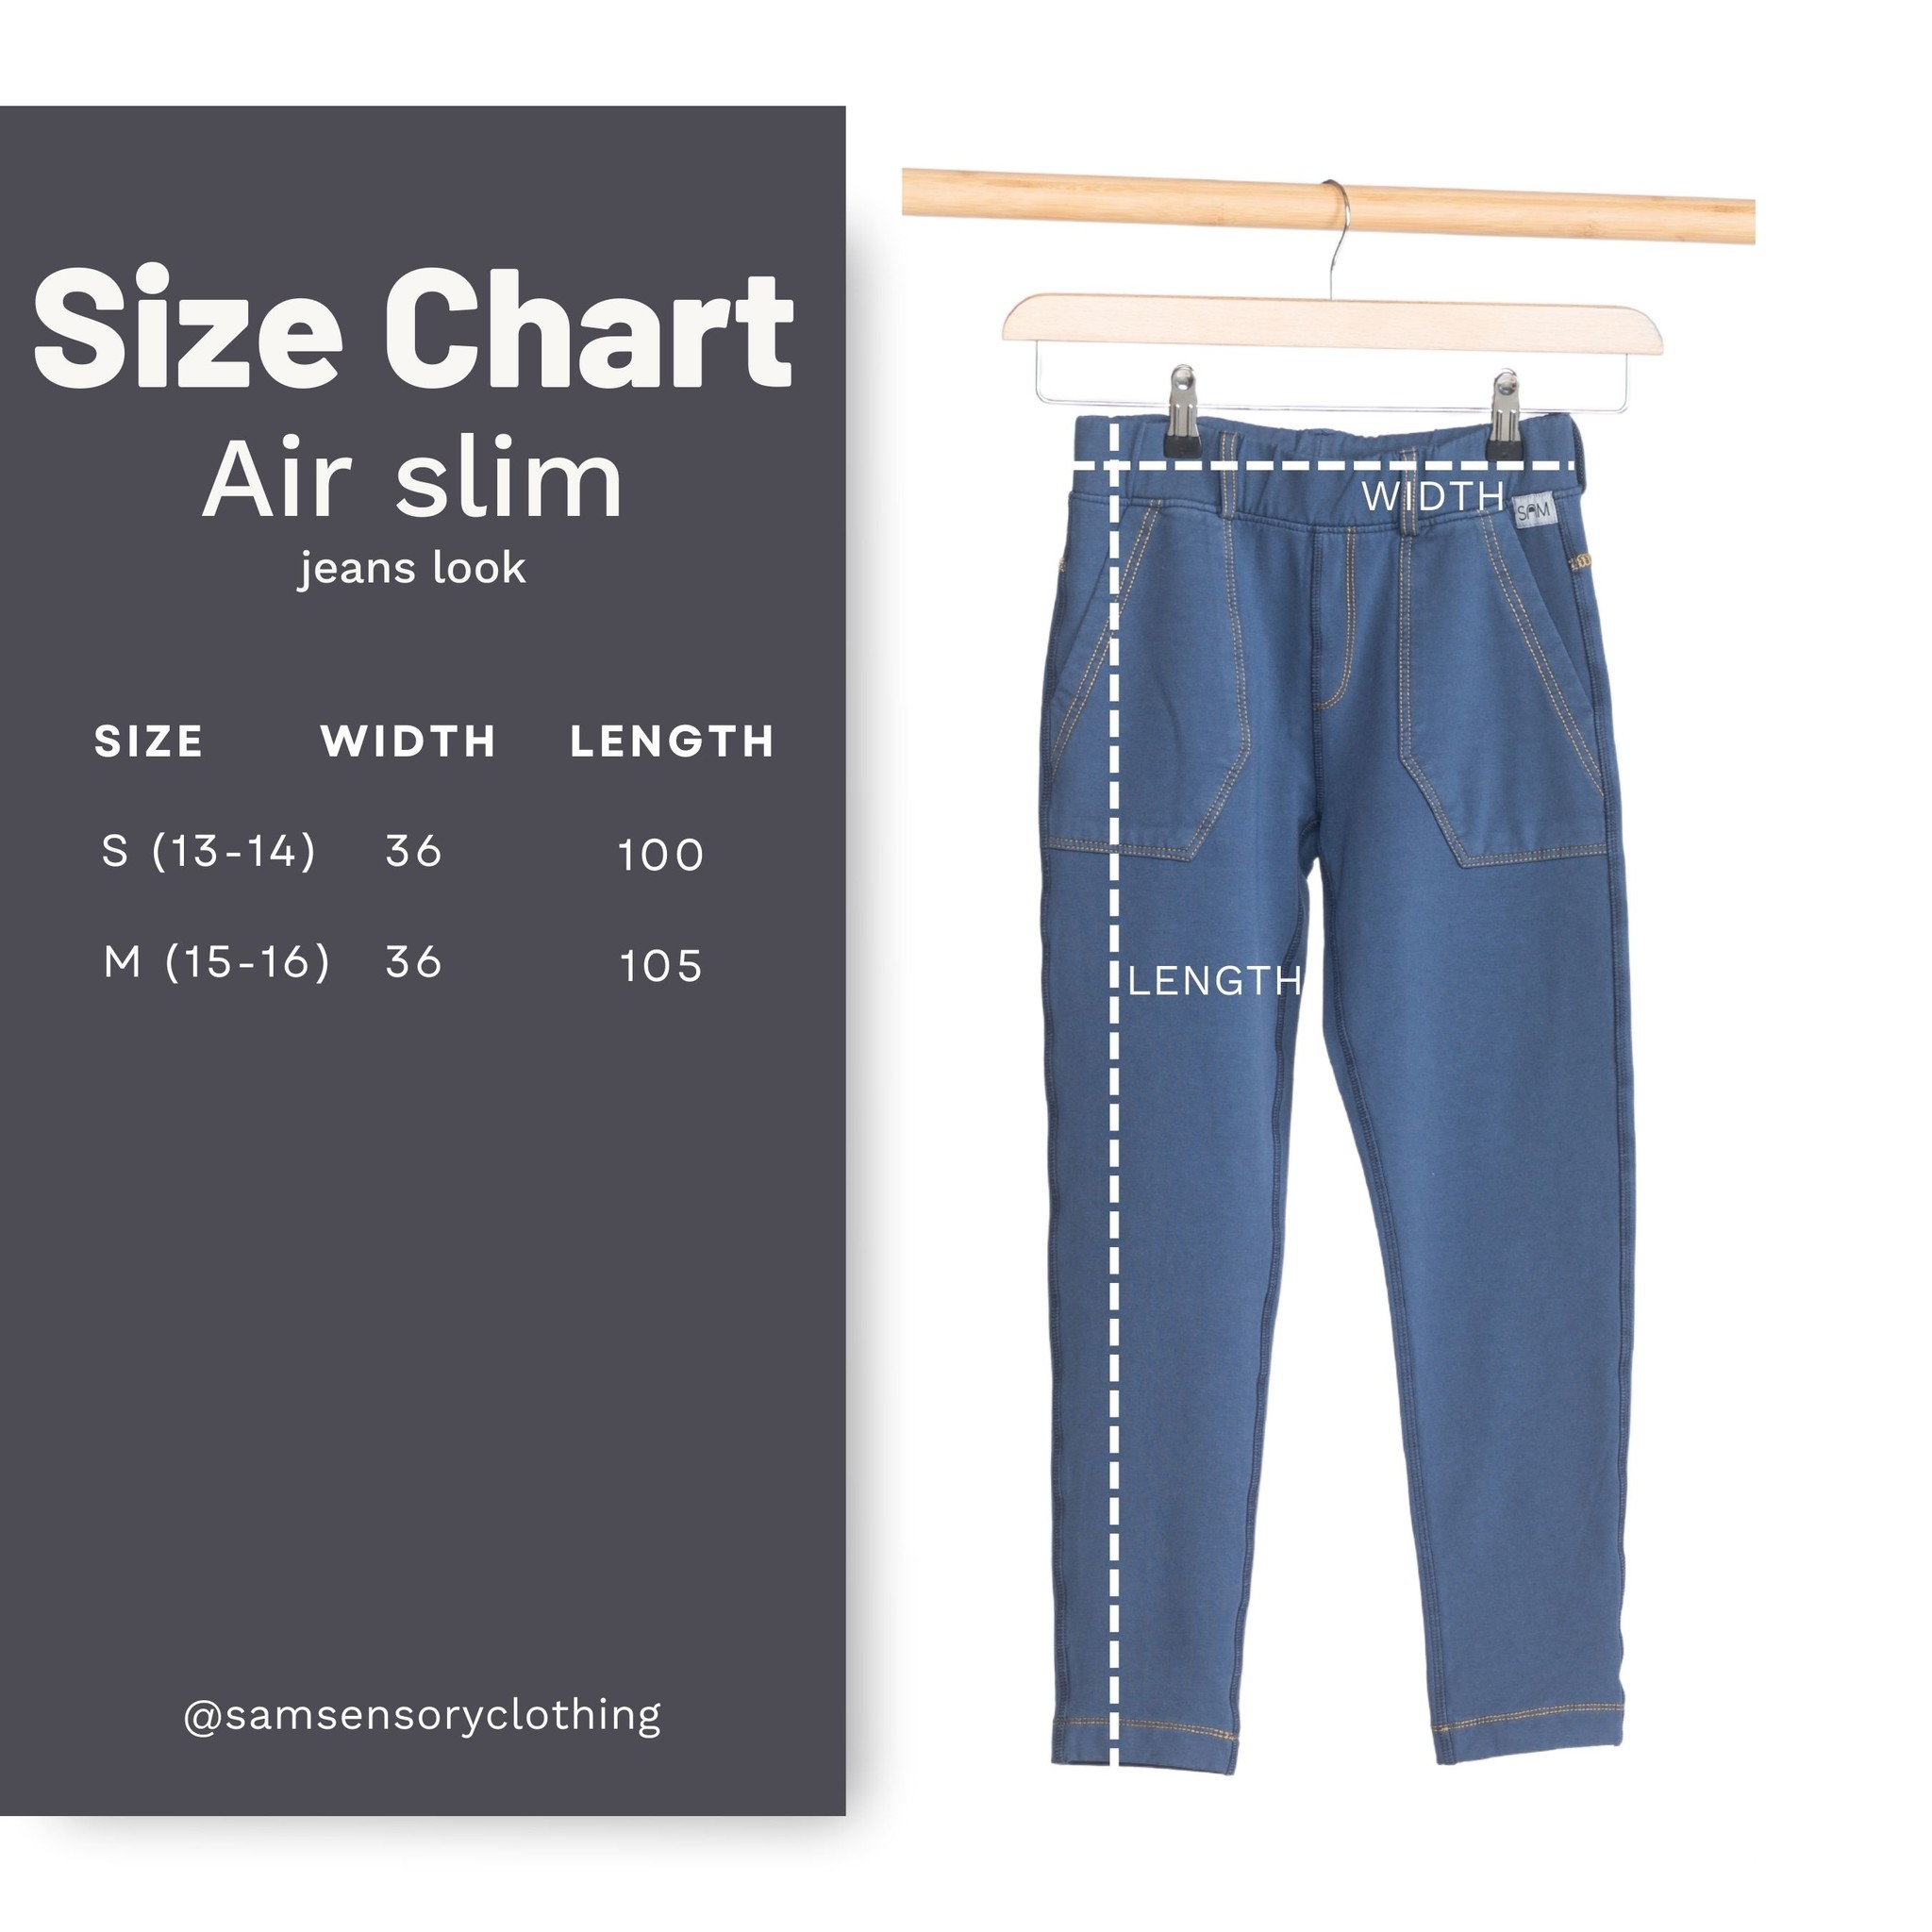 How To Measure Your Waist To Determine Your Jeans Size